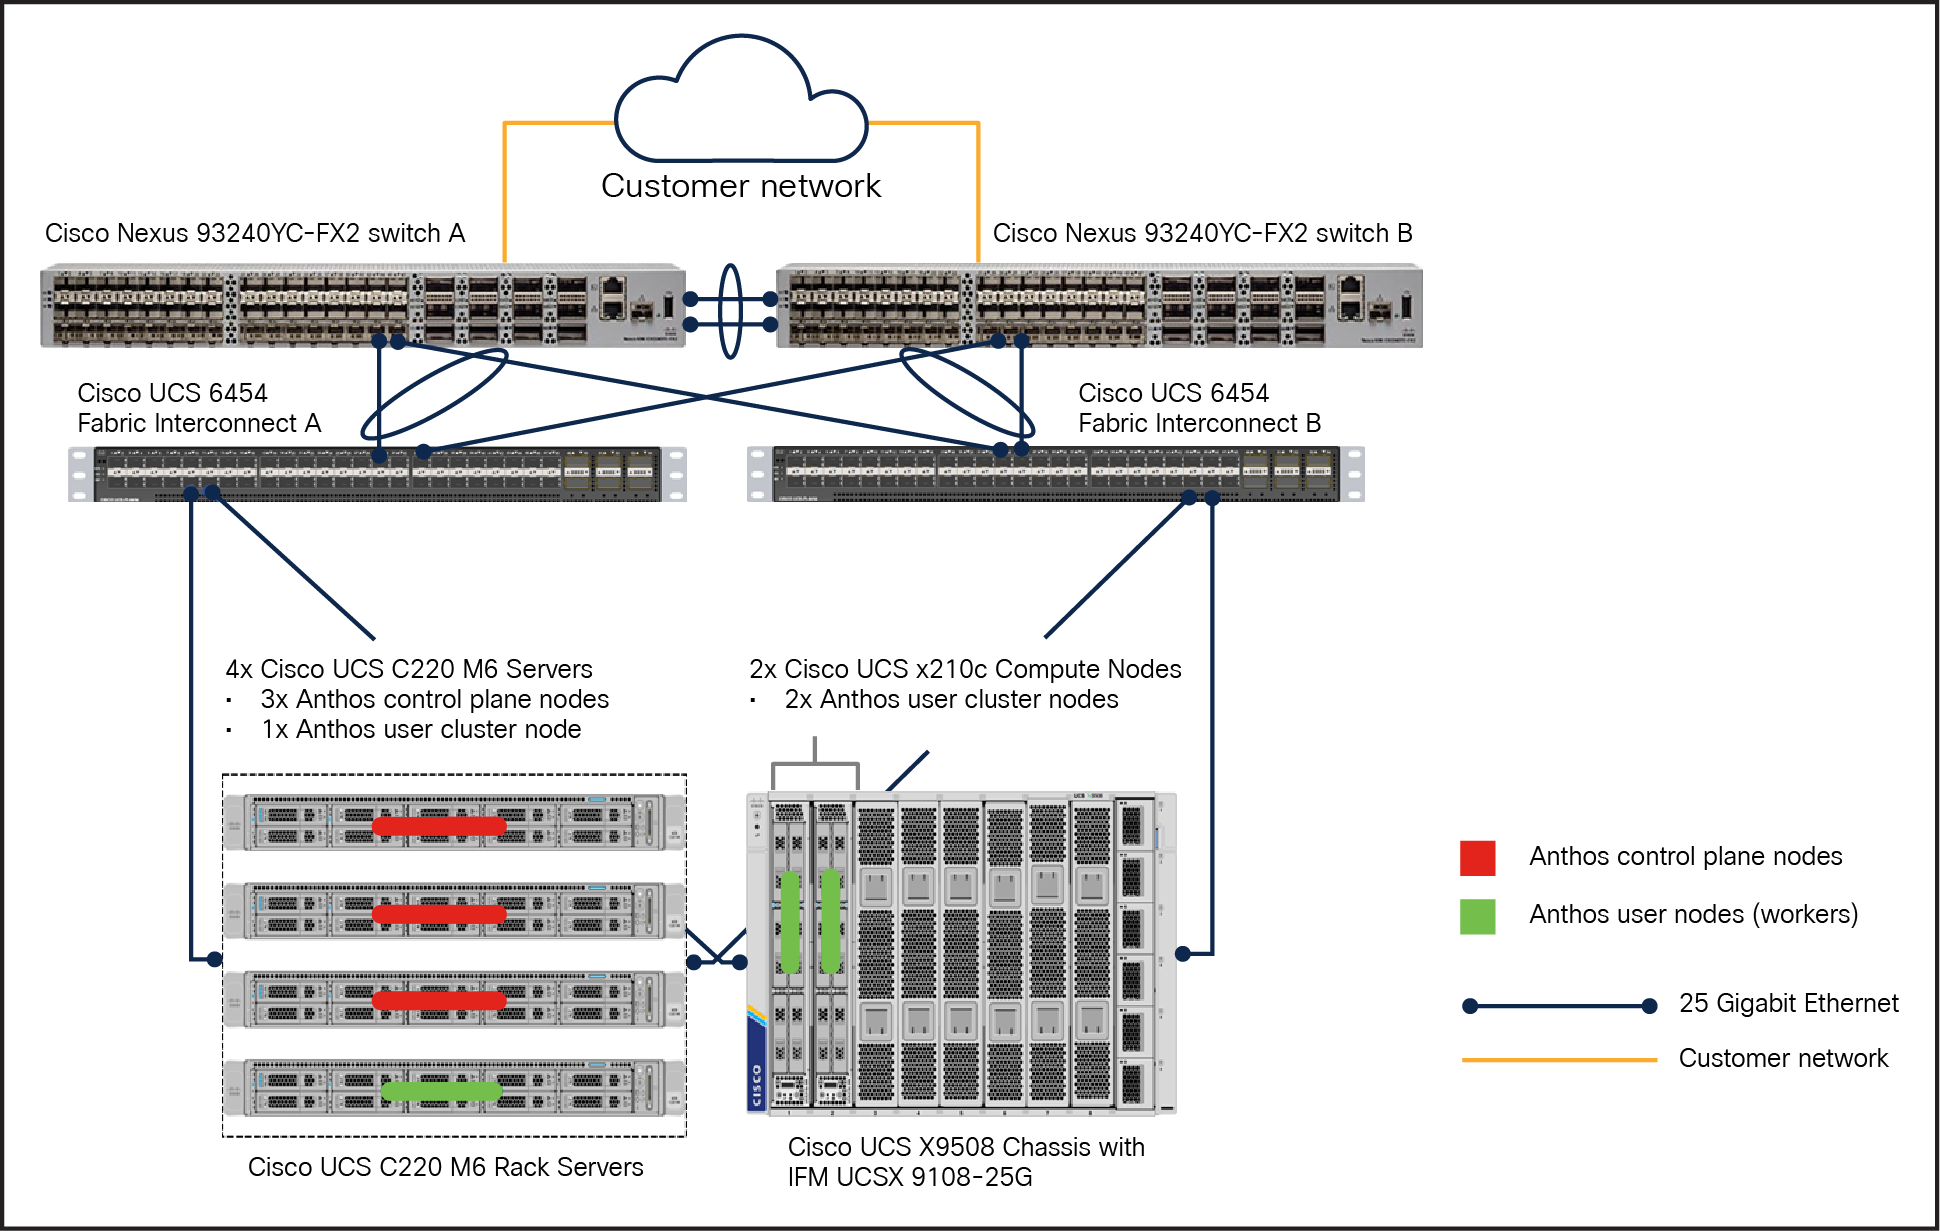 Reference architecture for Anthos bare metal in HA mode on both Cisco X-Series and C-Series M6 servers